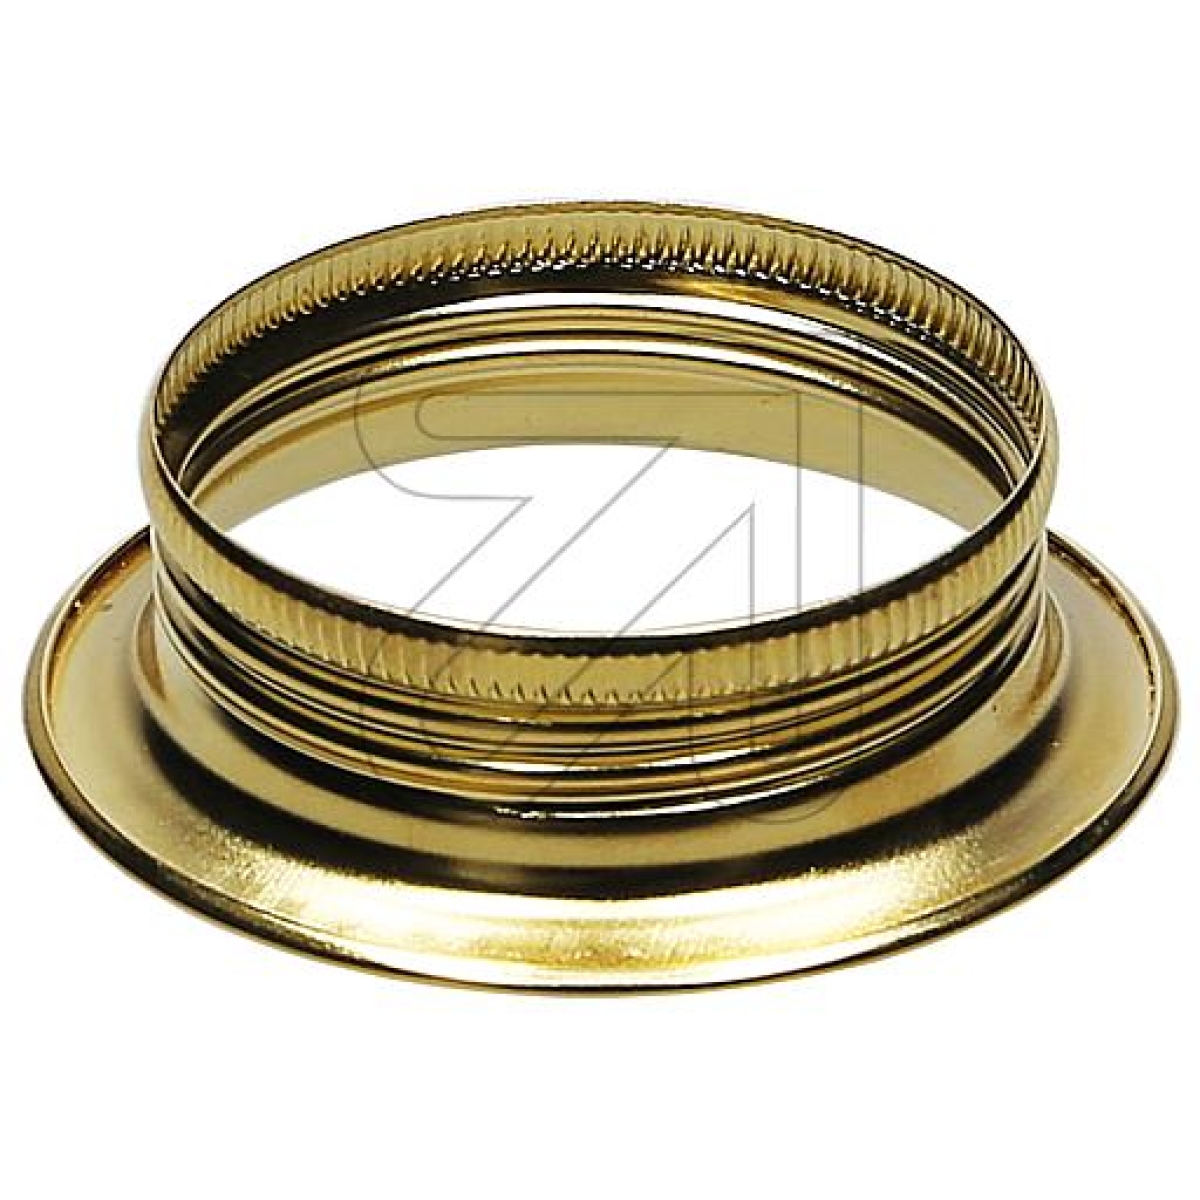 Schaum GmbHMetal ring for socket E27 brass-Price for 5 pcs.Article-No: 605510